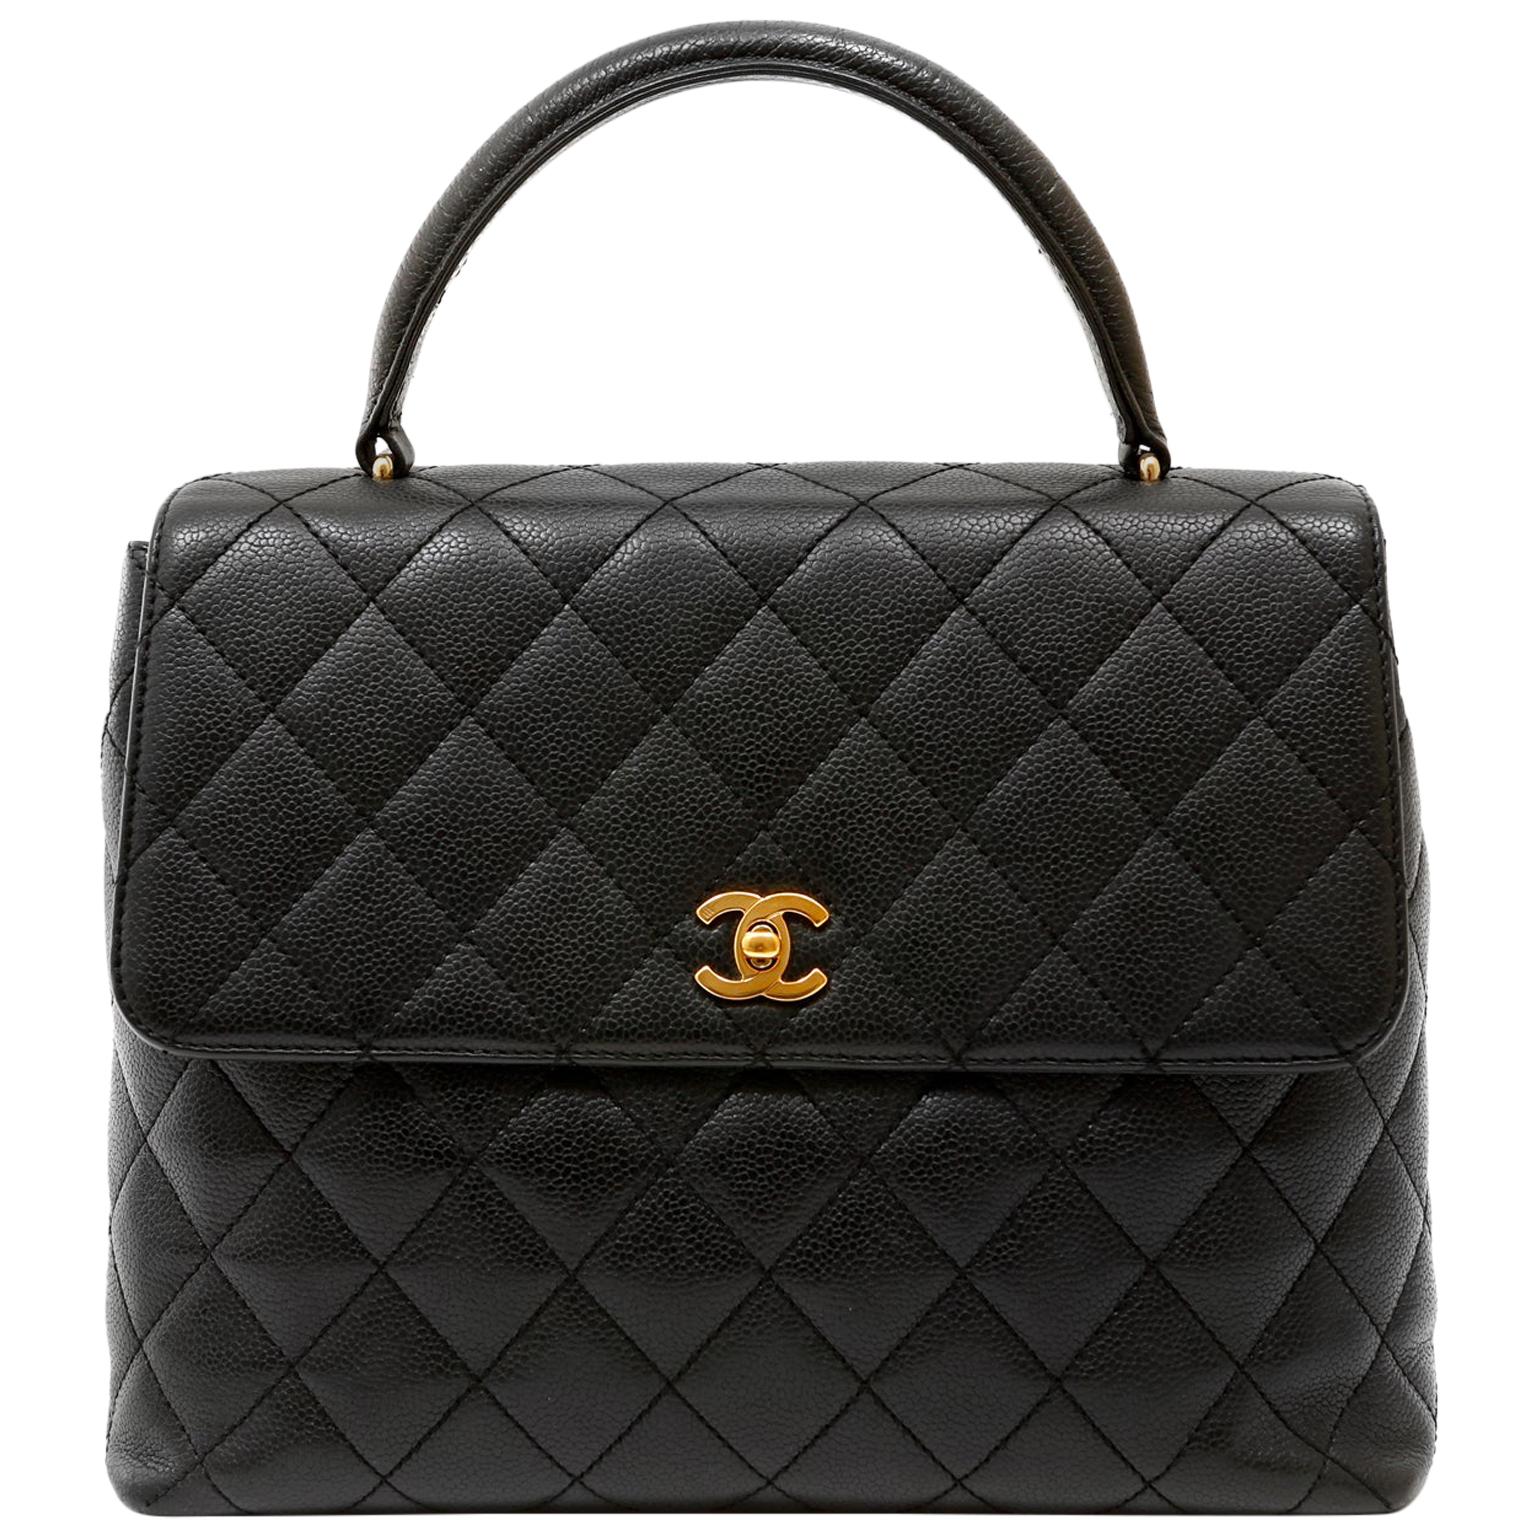 Chanel Black Quilted Caviar Top Handle Bag